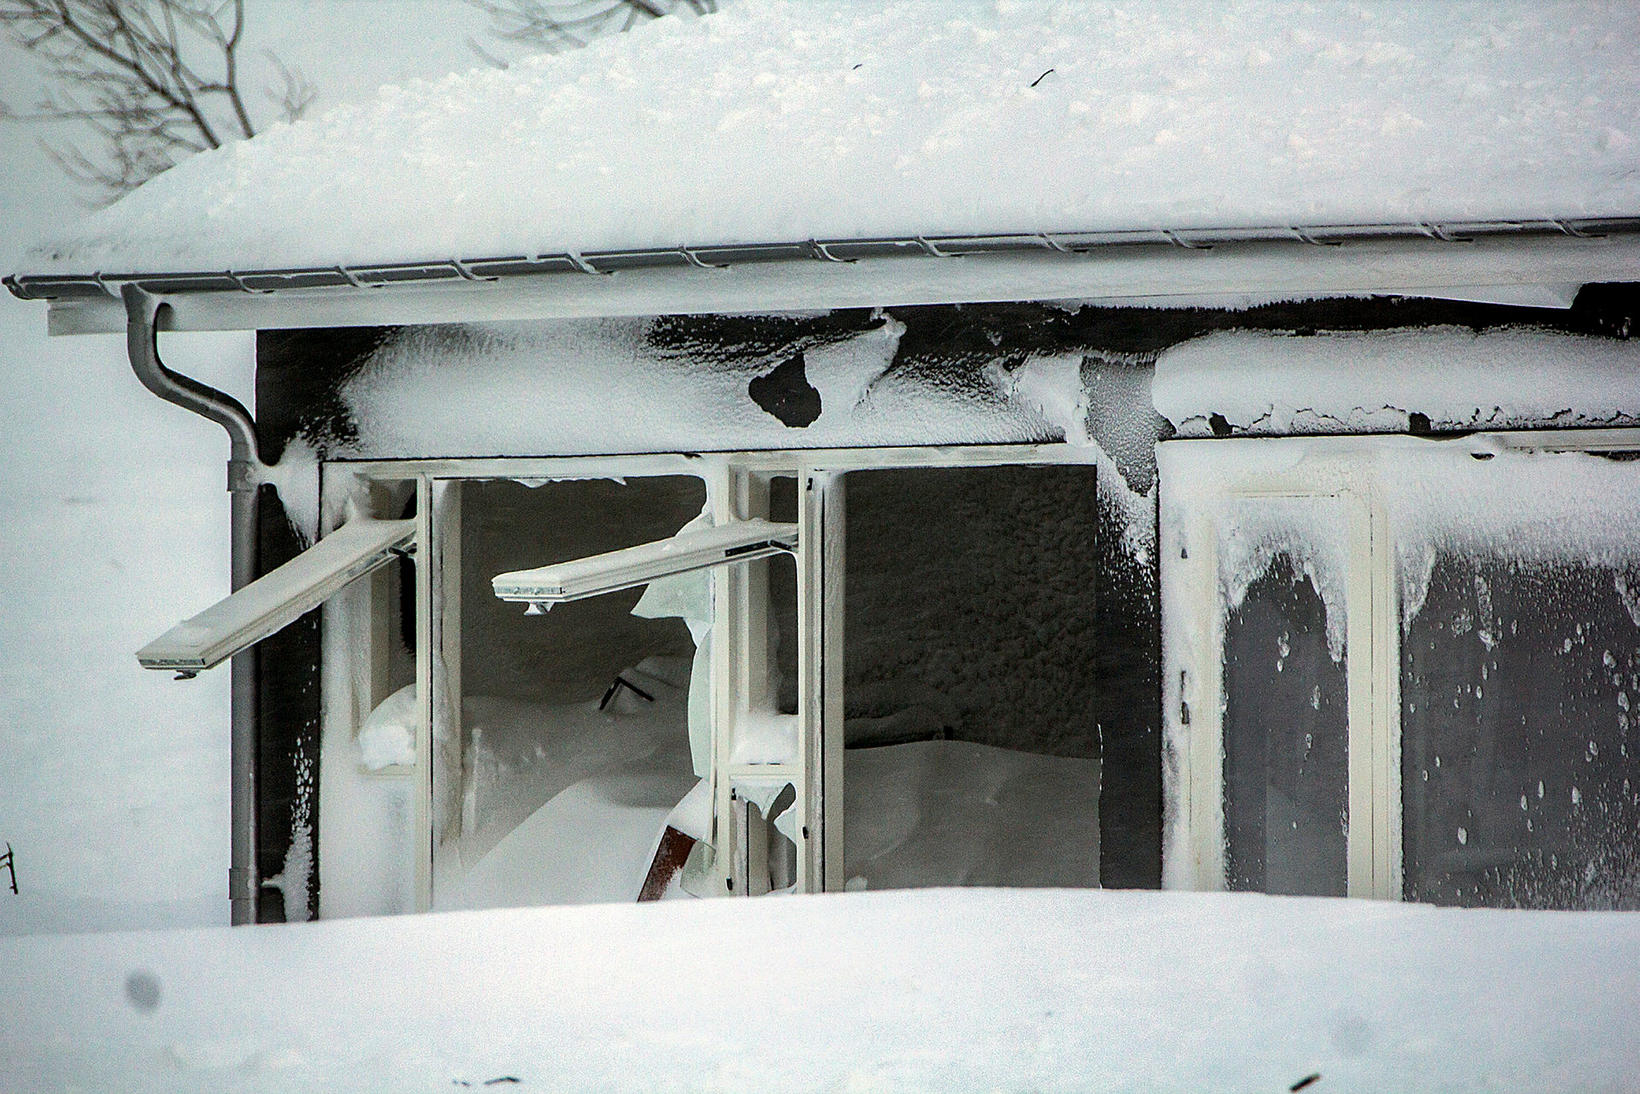 This is what their house looked like after the avalanche …